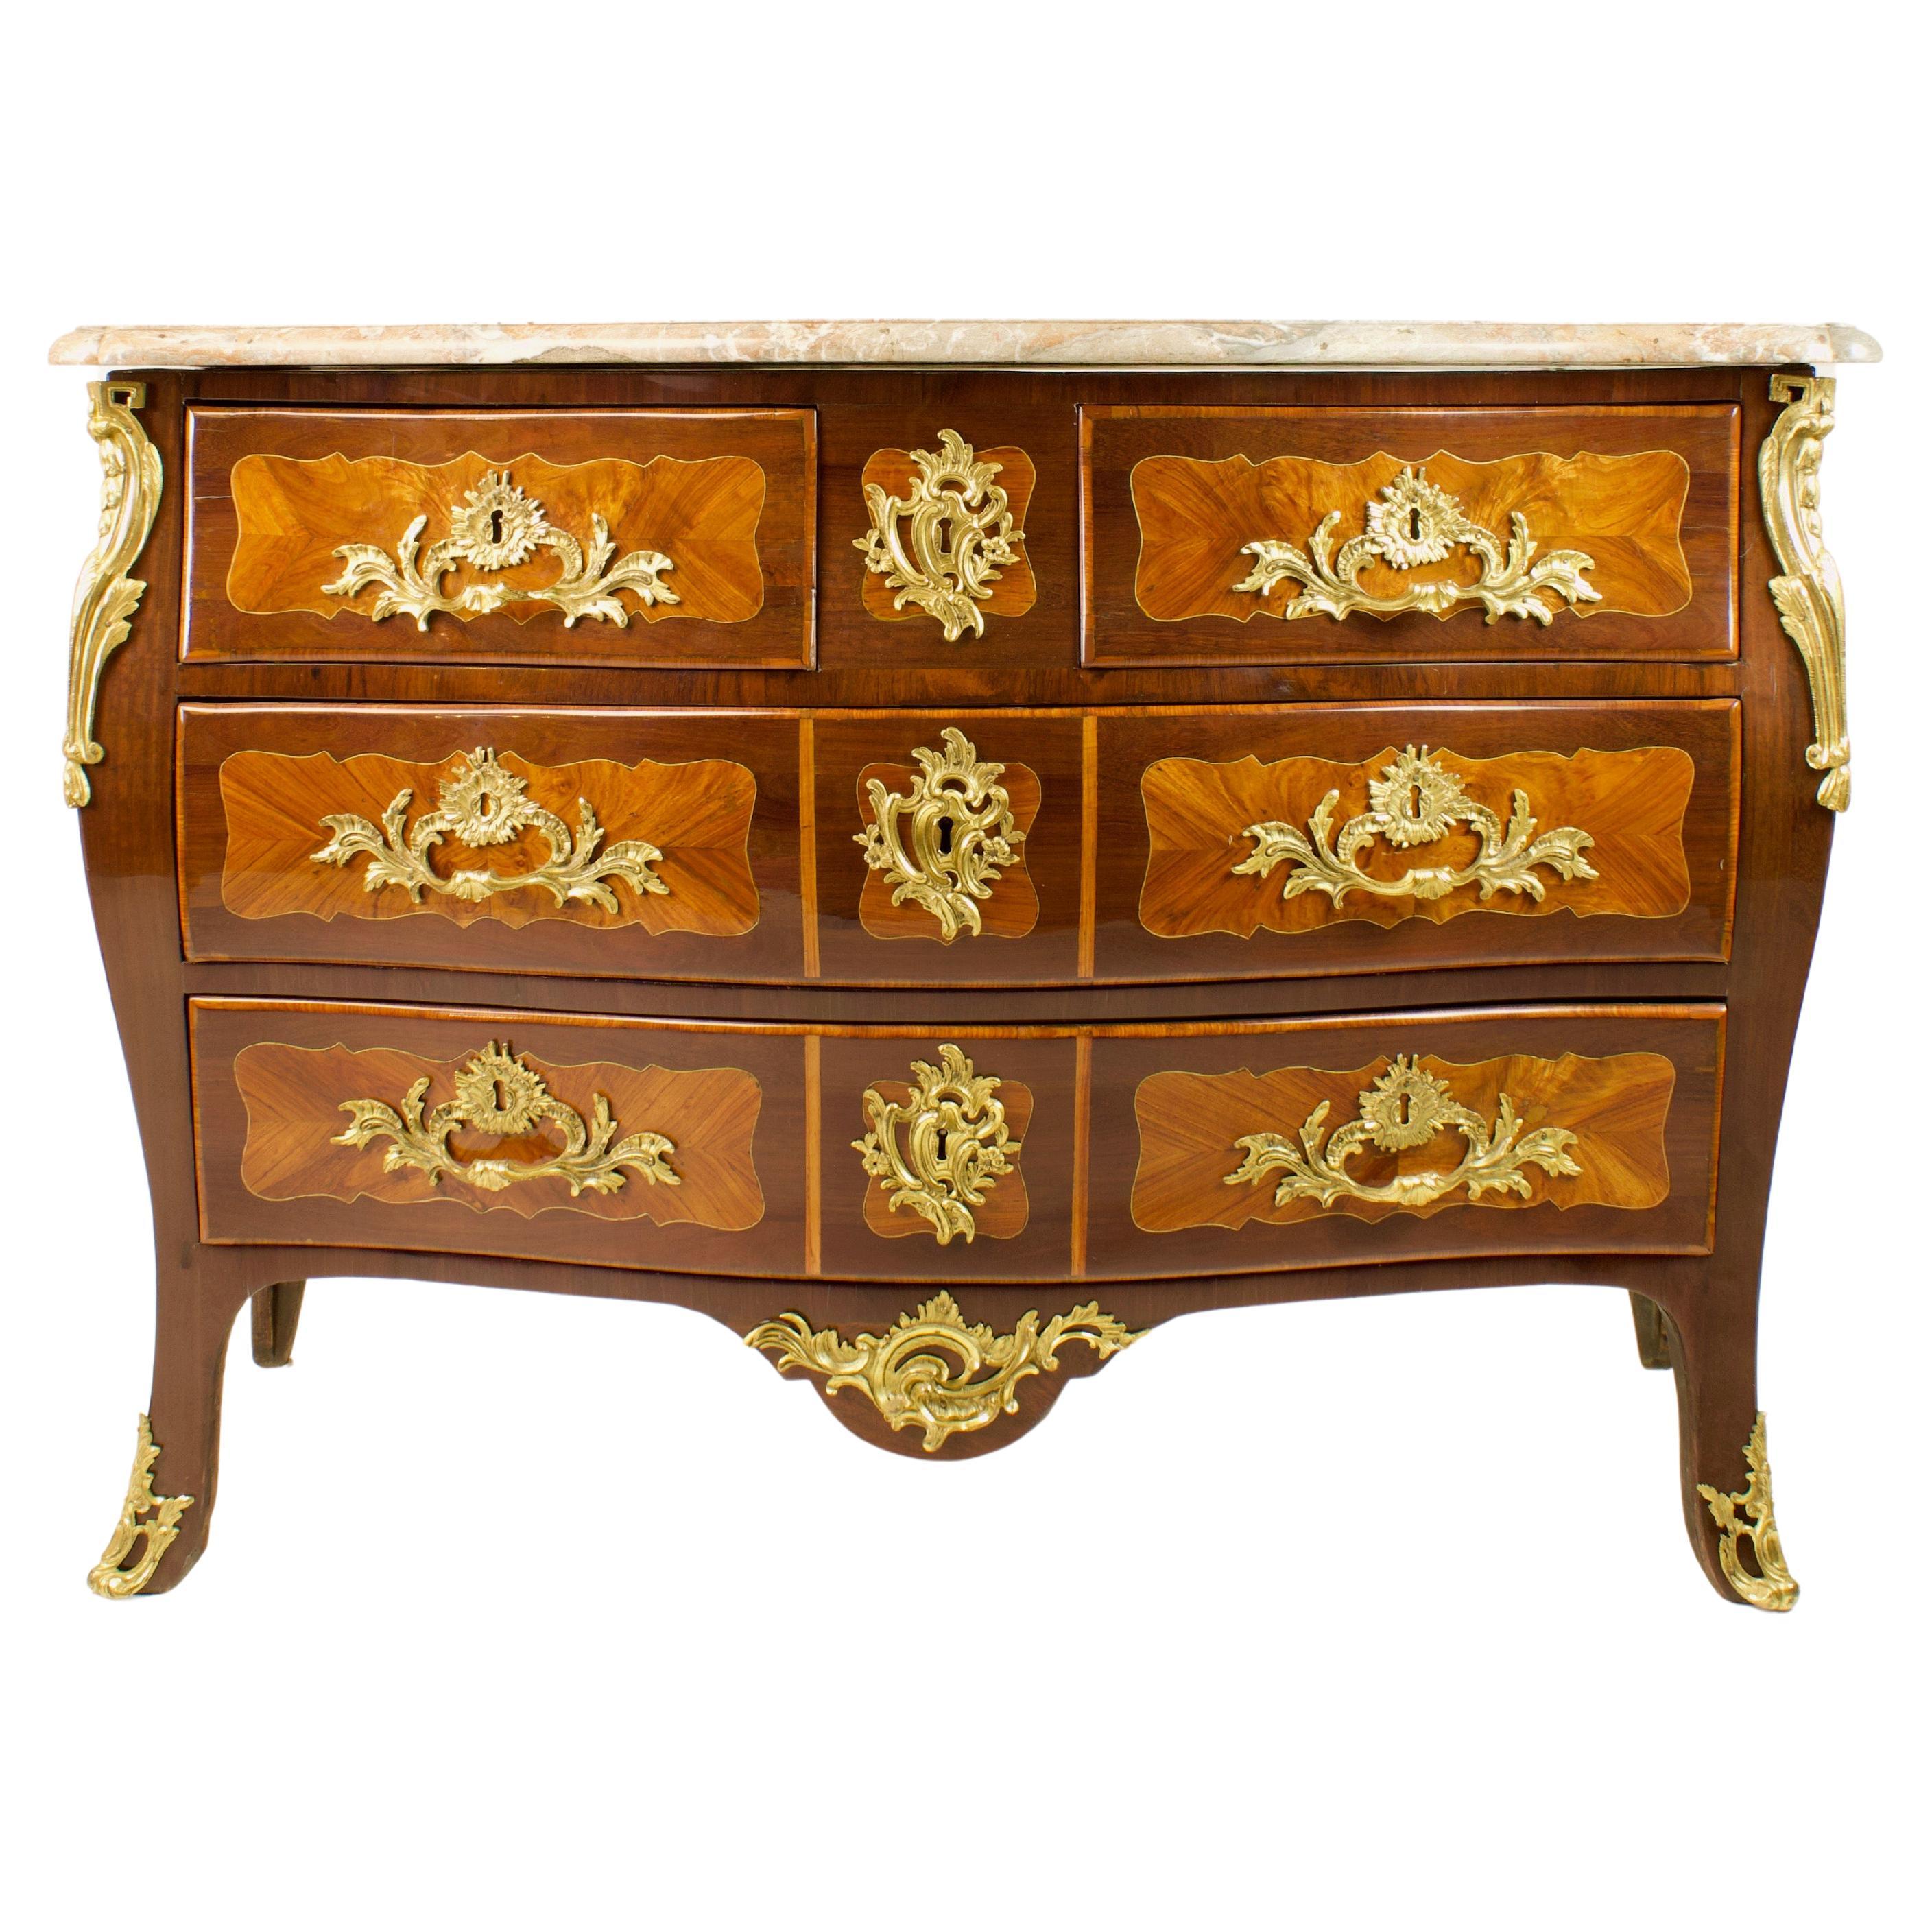 French Louis XV Marquetry Gilt-Bronze Commode 'En Tombeau', Stamped "Birckle" For Sale